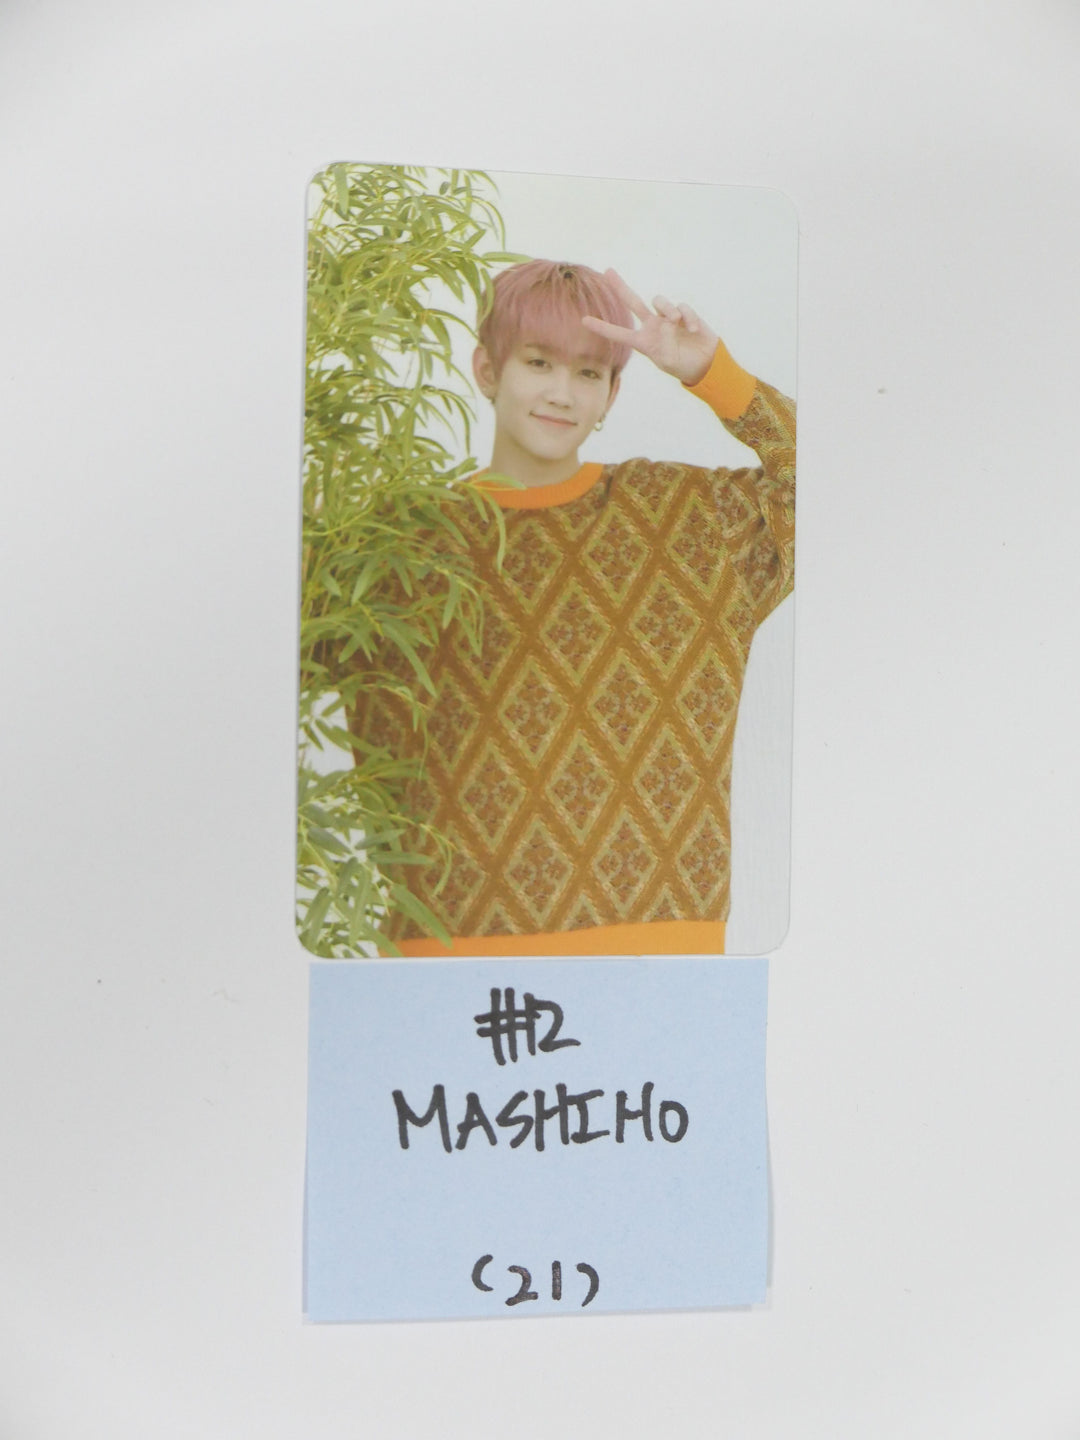 Treasure 'The First Step' - Official Photocard [ MASHIHO ]